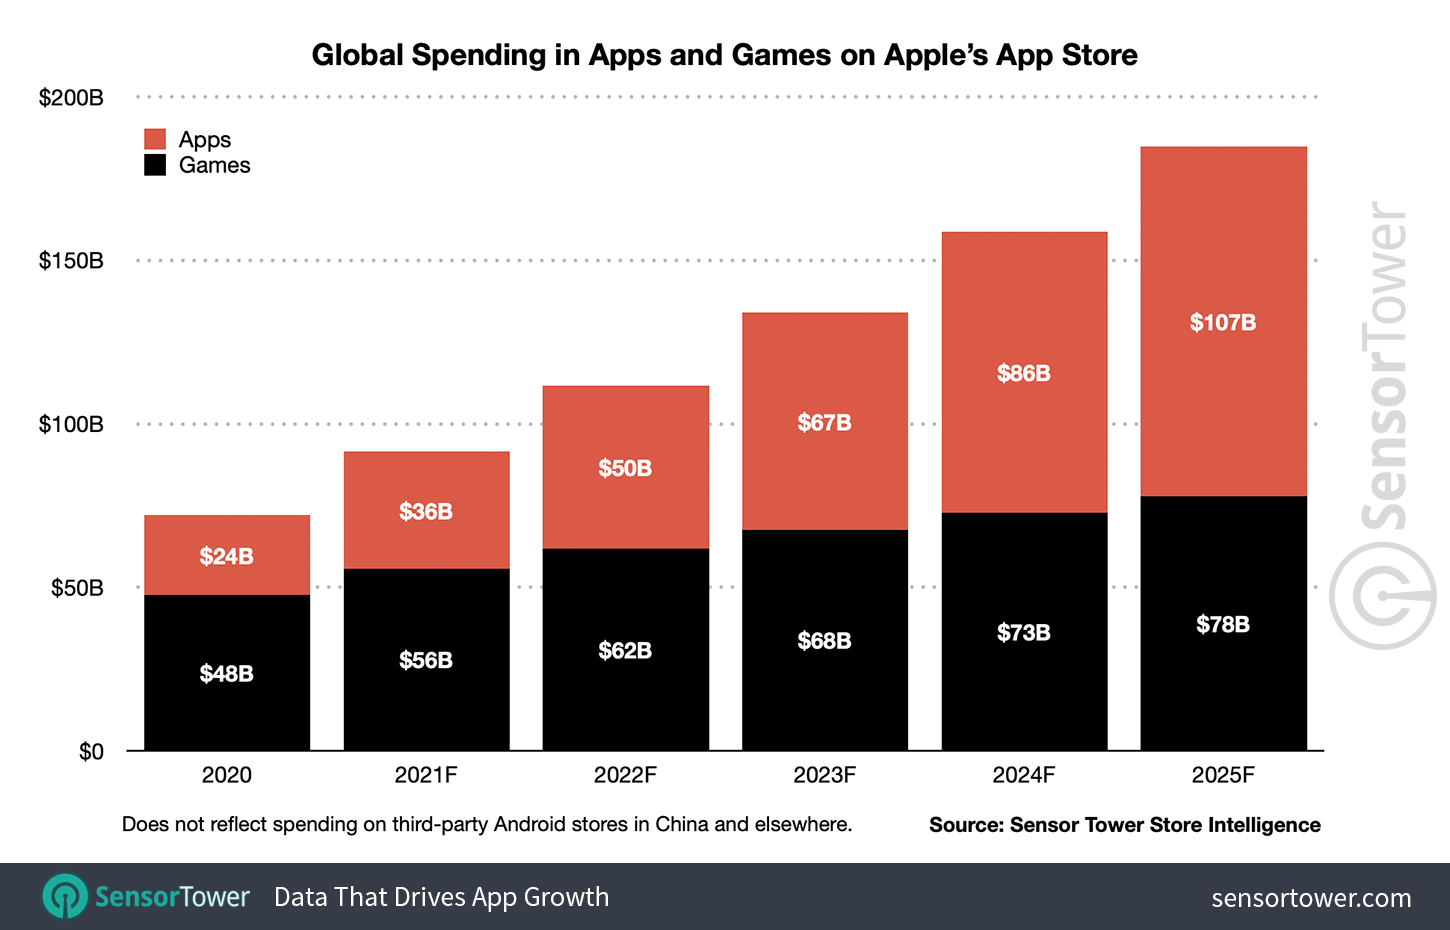 Consumer spending in non-game apps will surpass mobile games in 2024